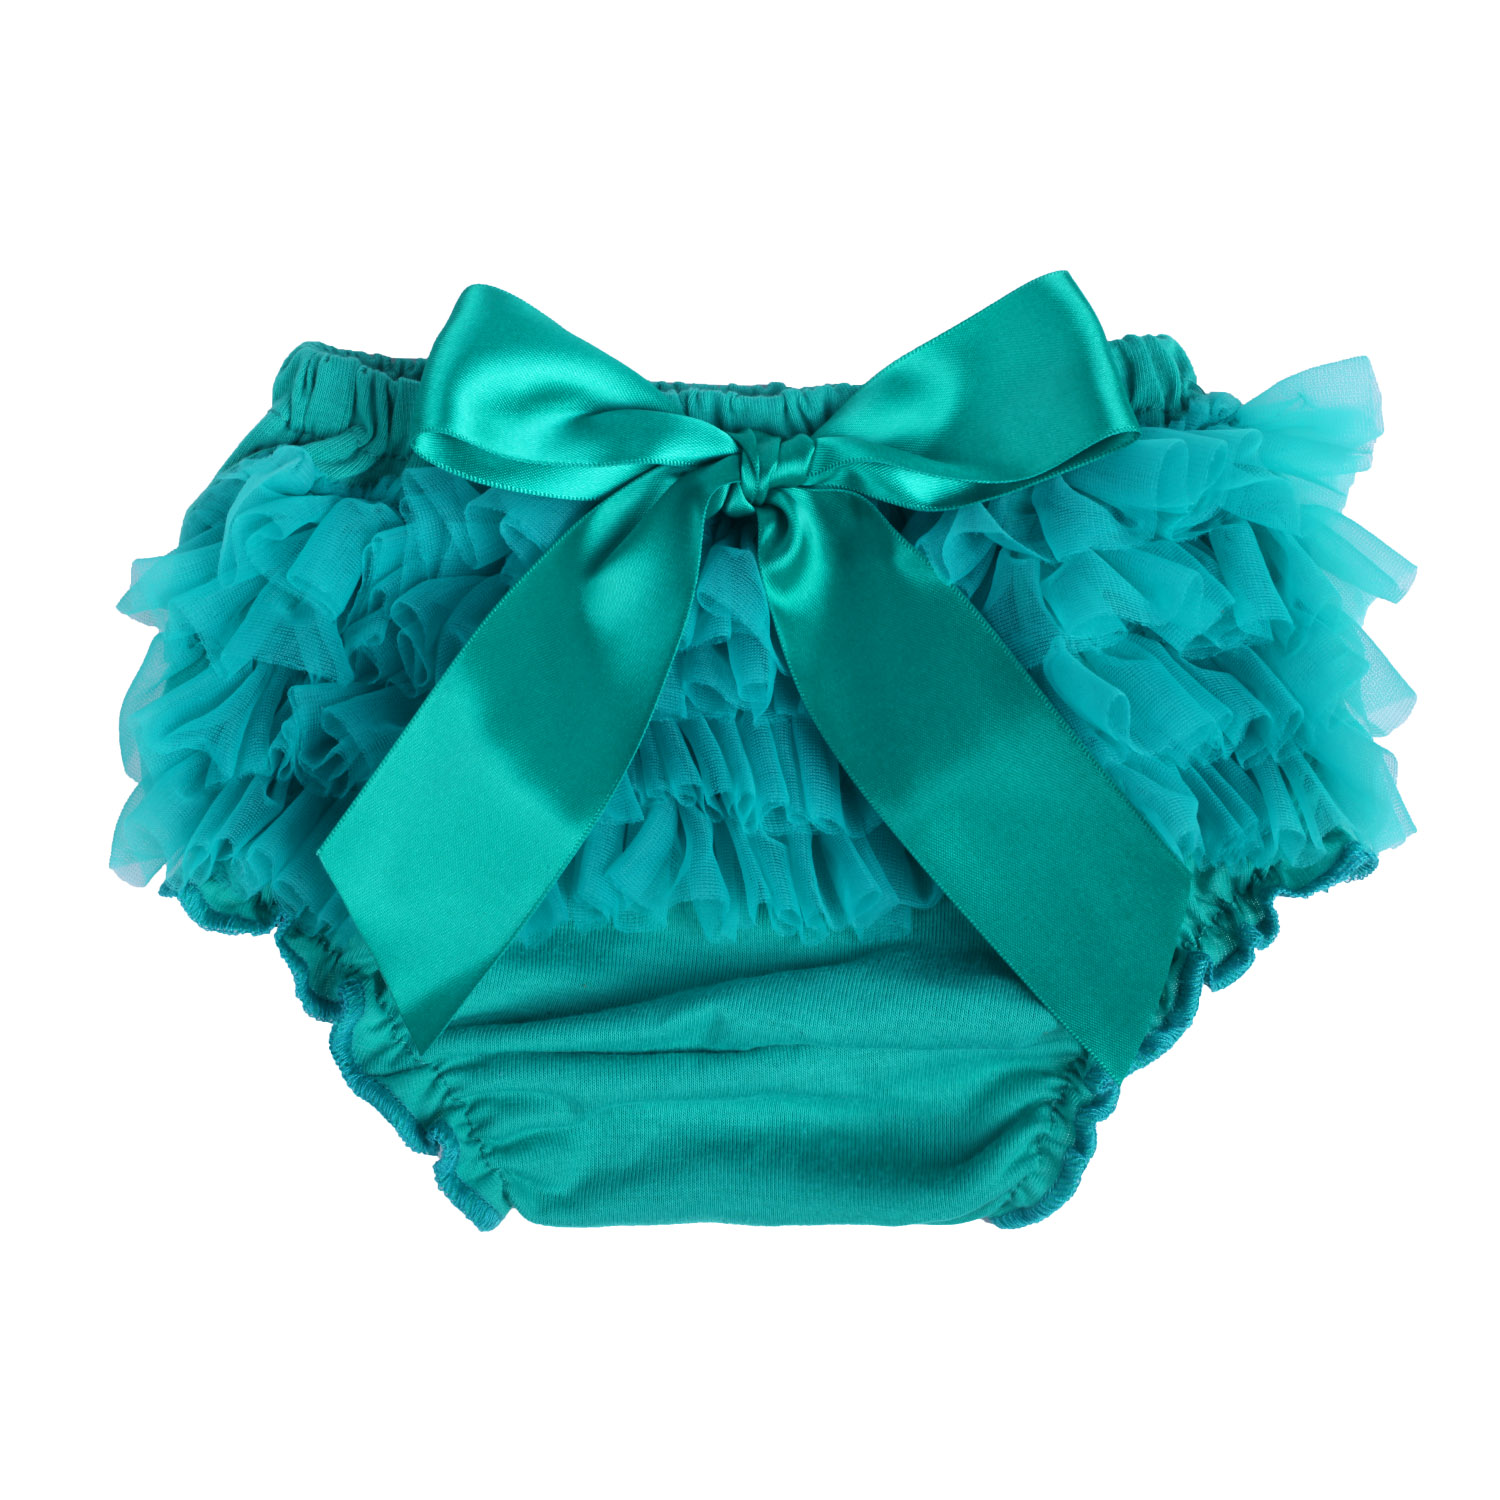 Teal Ruffle Bloomer Diaper Cover for Baby Girls Toddlers-bloomer